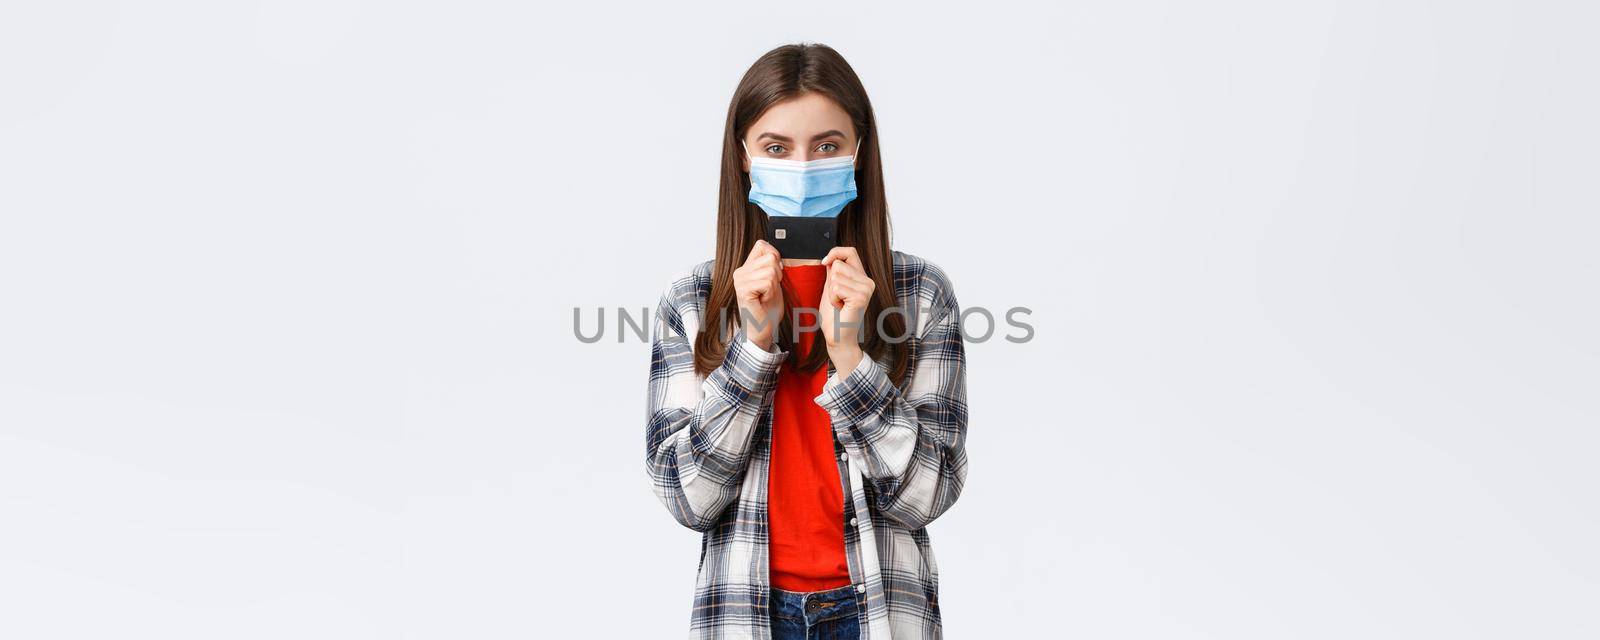 Coronavirus outbreak, working from home, online shopping and contactless payment concept. Girl in medical mask smiling sly and showing credit card, ready waste all money in internet stores.